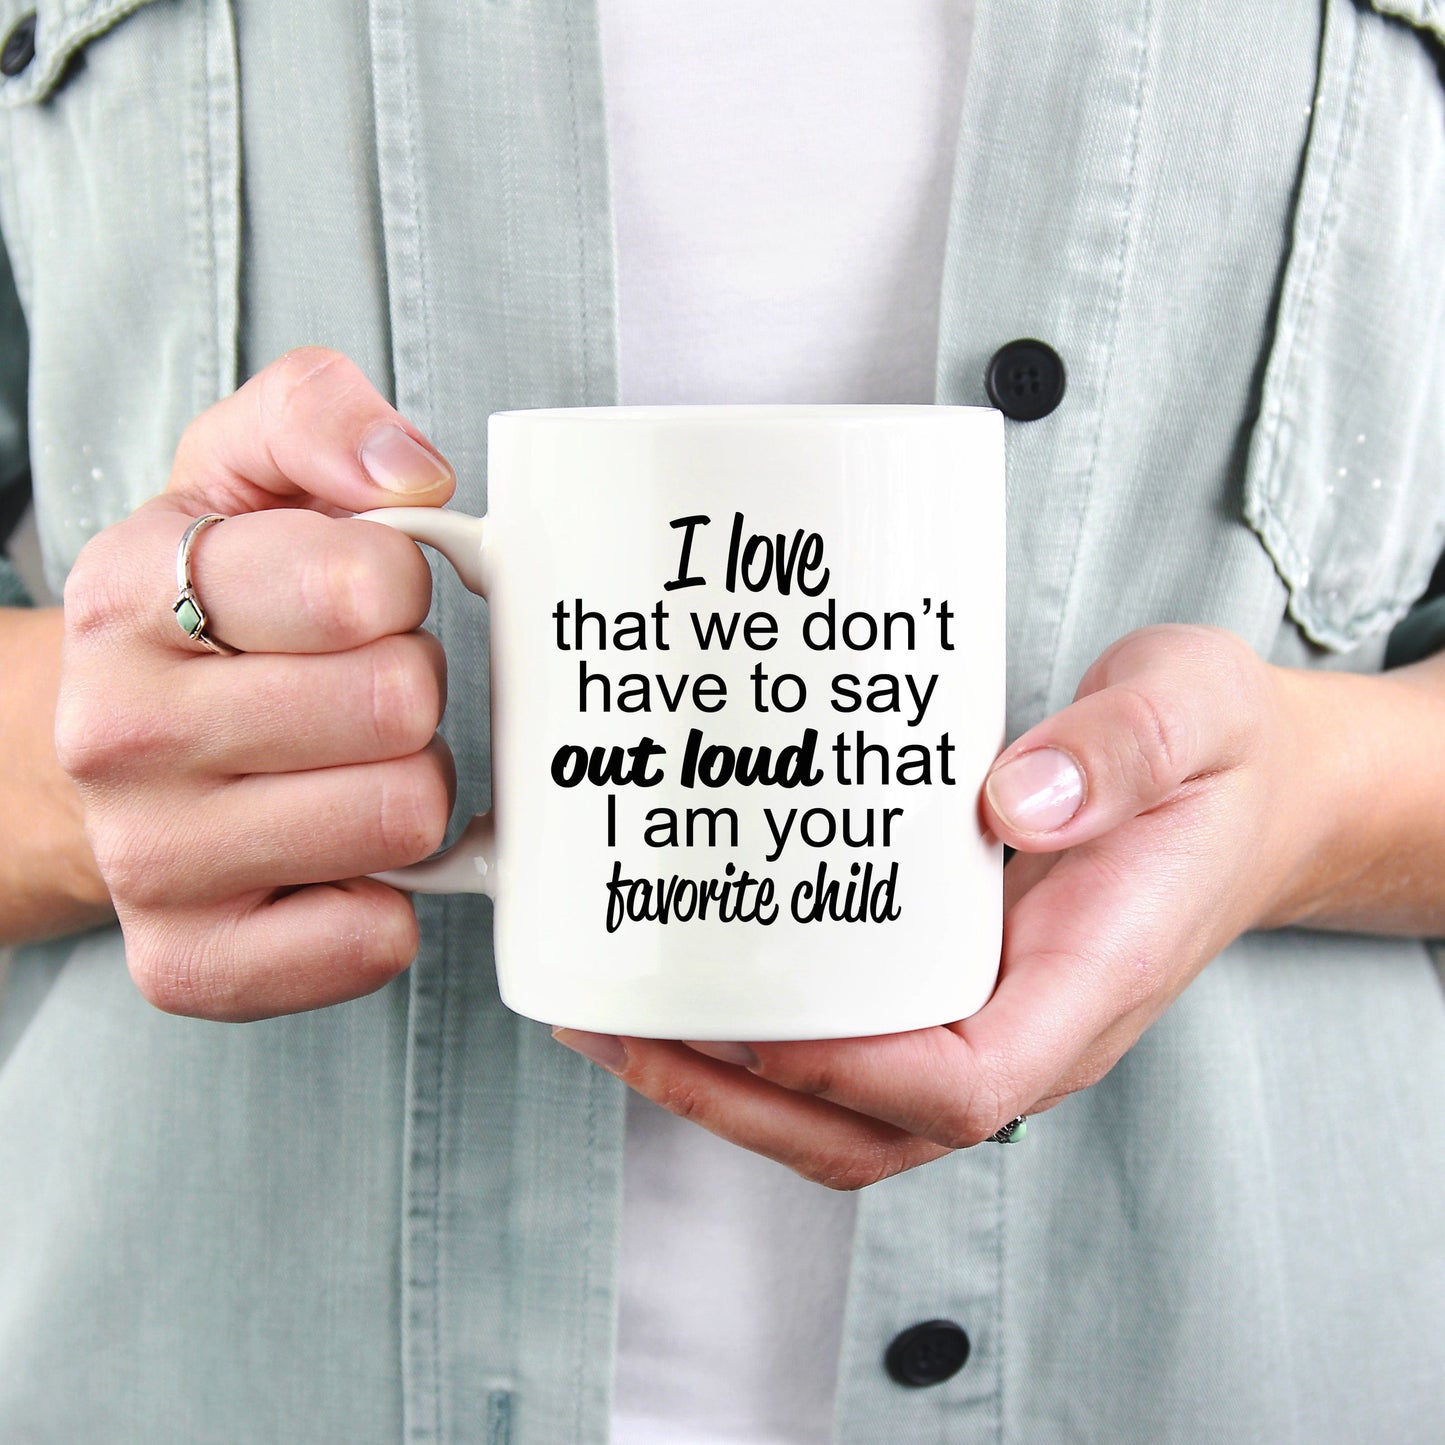 Favorite Child to Mother or Father Mug - Perfect Gift for Mother's Day or Father's Day